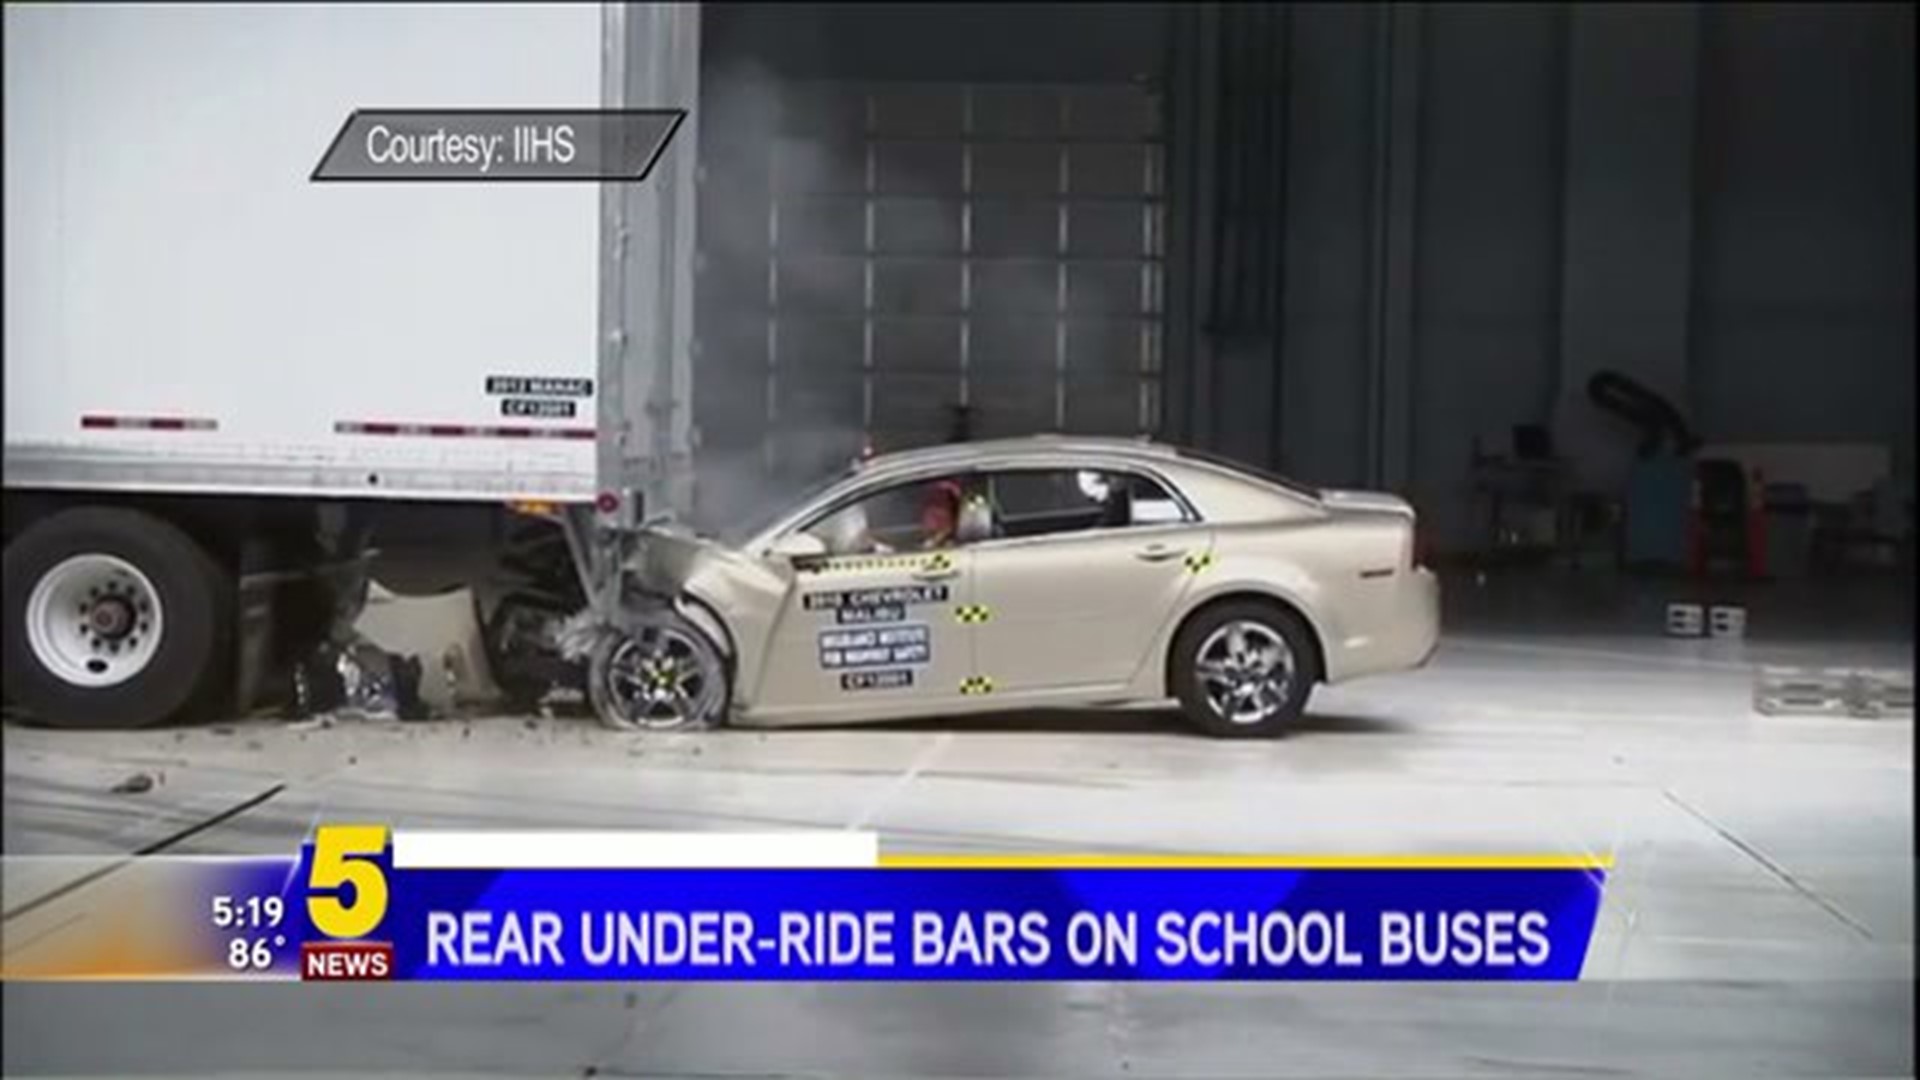 Questions About Rear Under-Ride Bars On School Buses Follow Deadly Crash